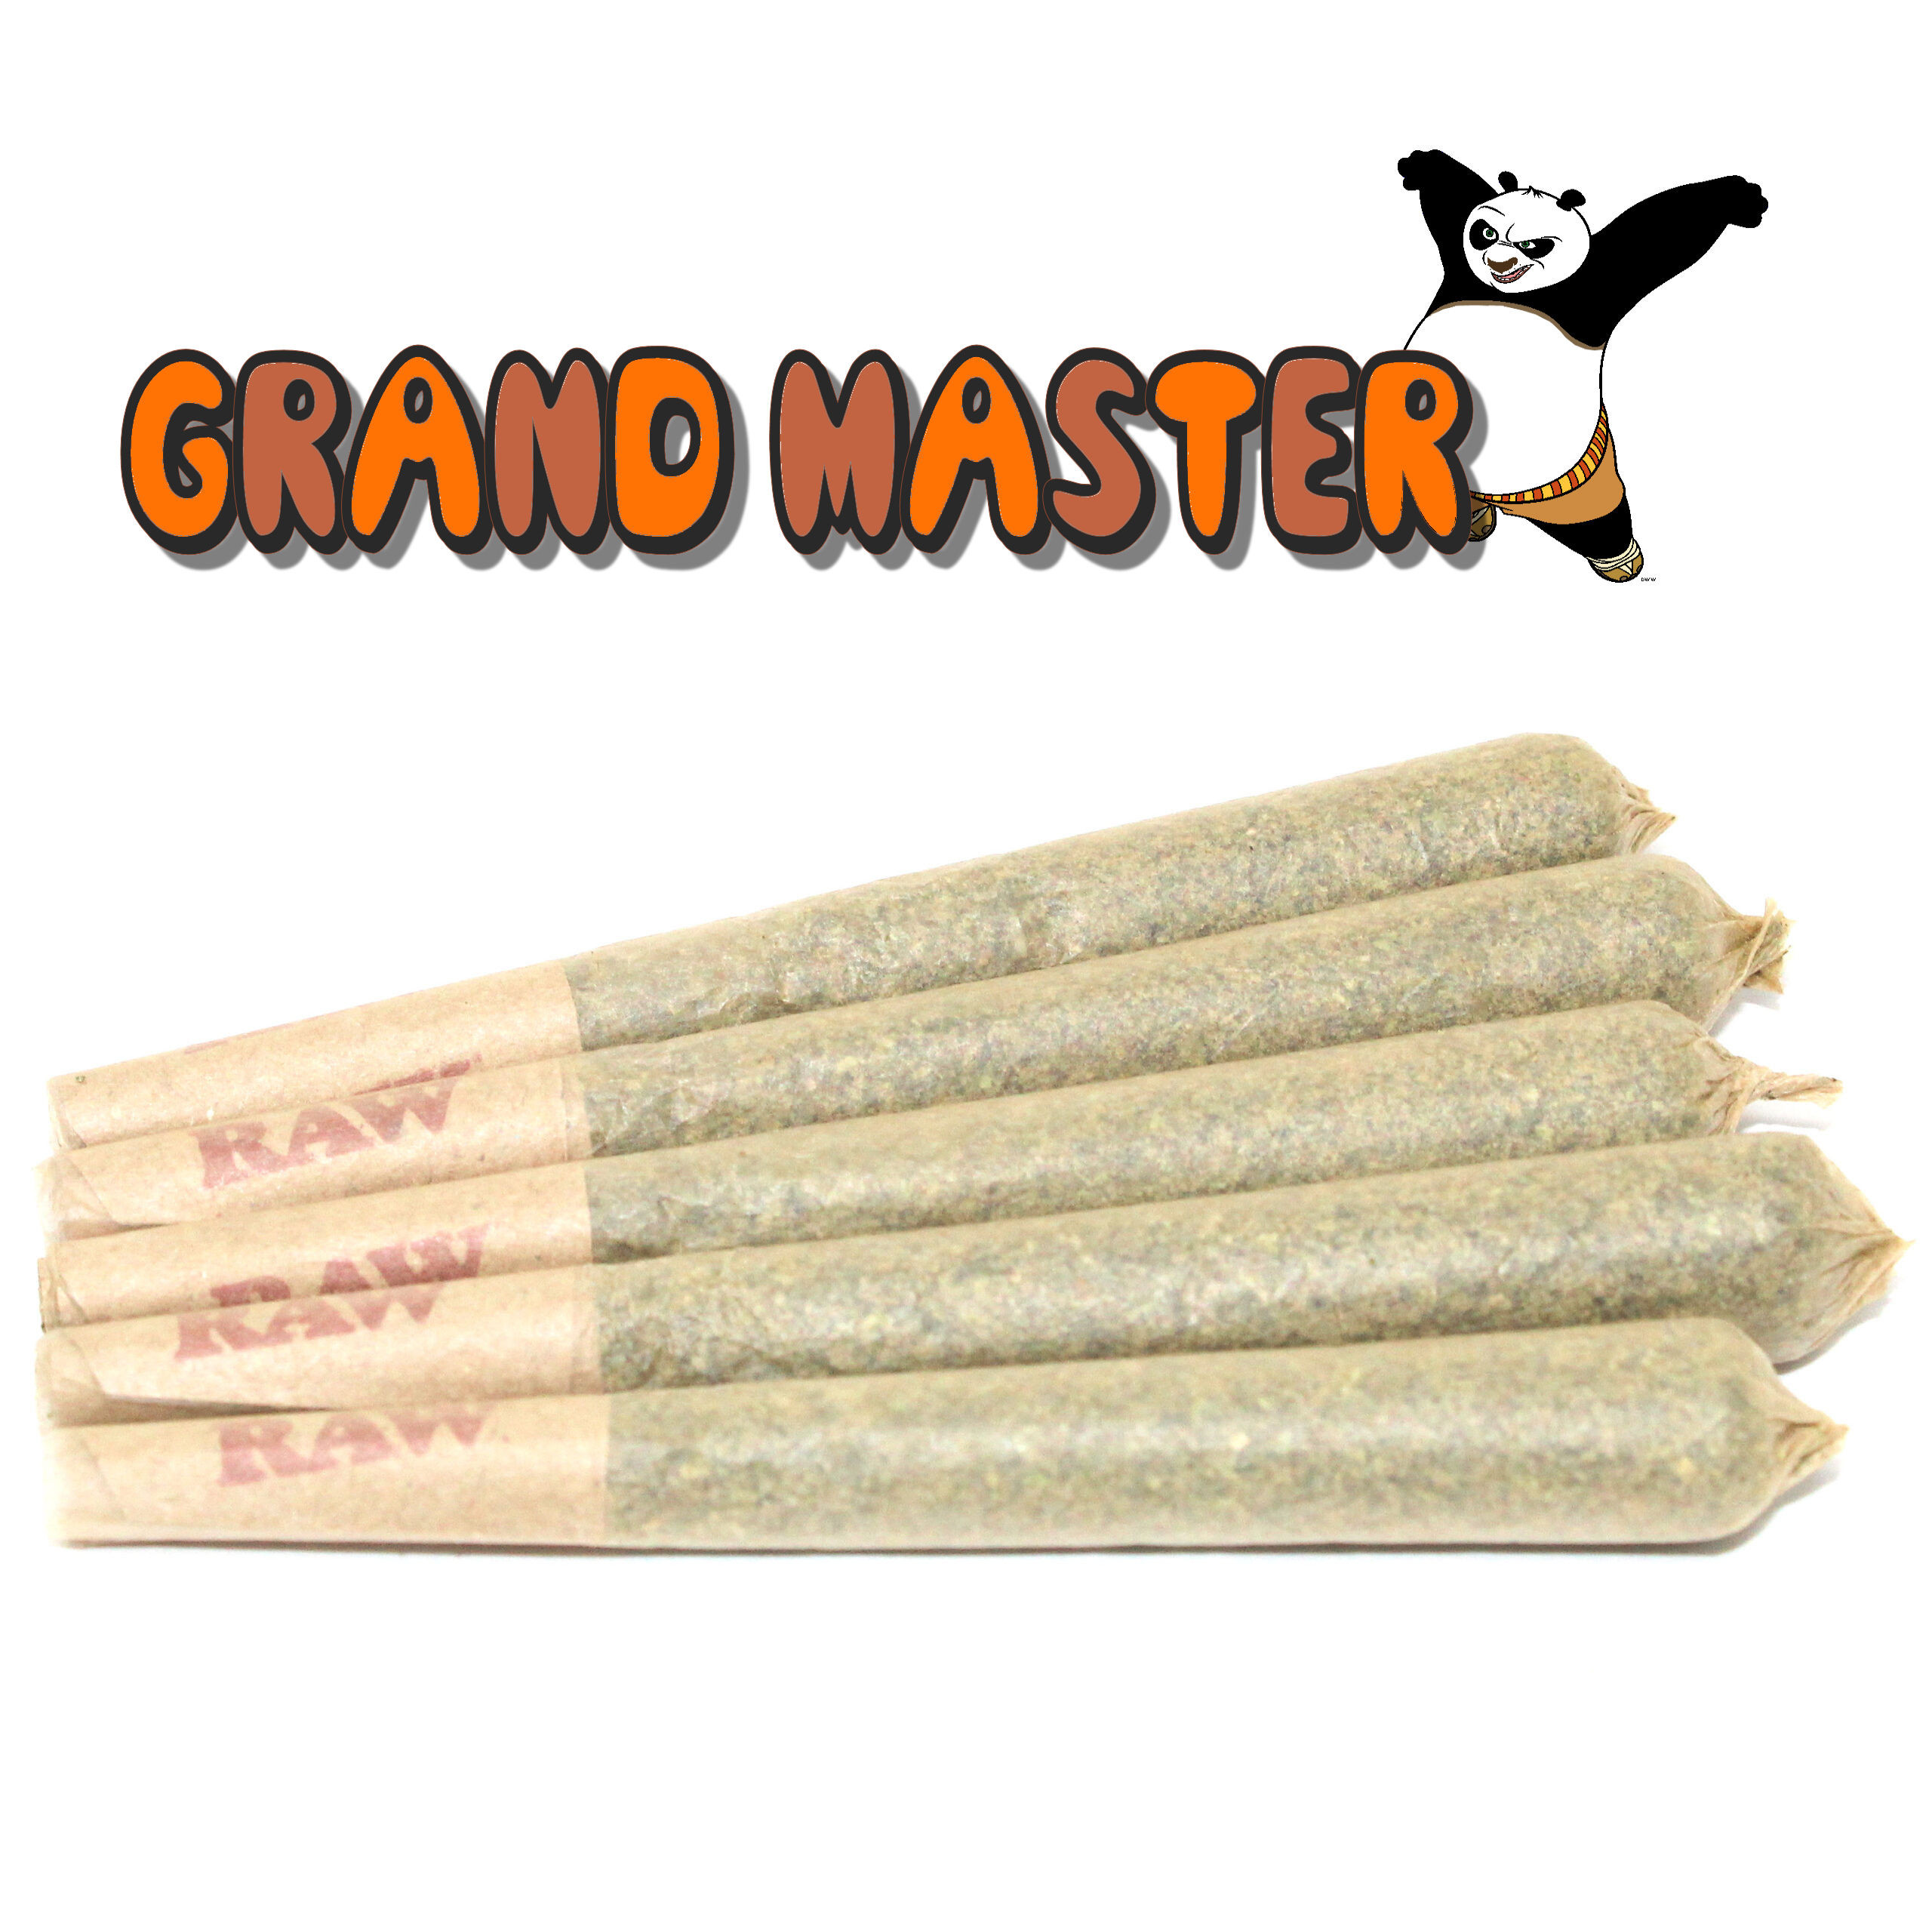 PRE-ROLLED JOINT - 'AAAA' GRAND MASTER KUSH (2G)